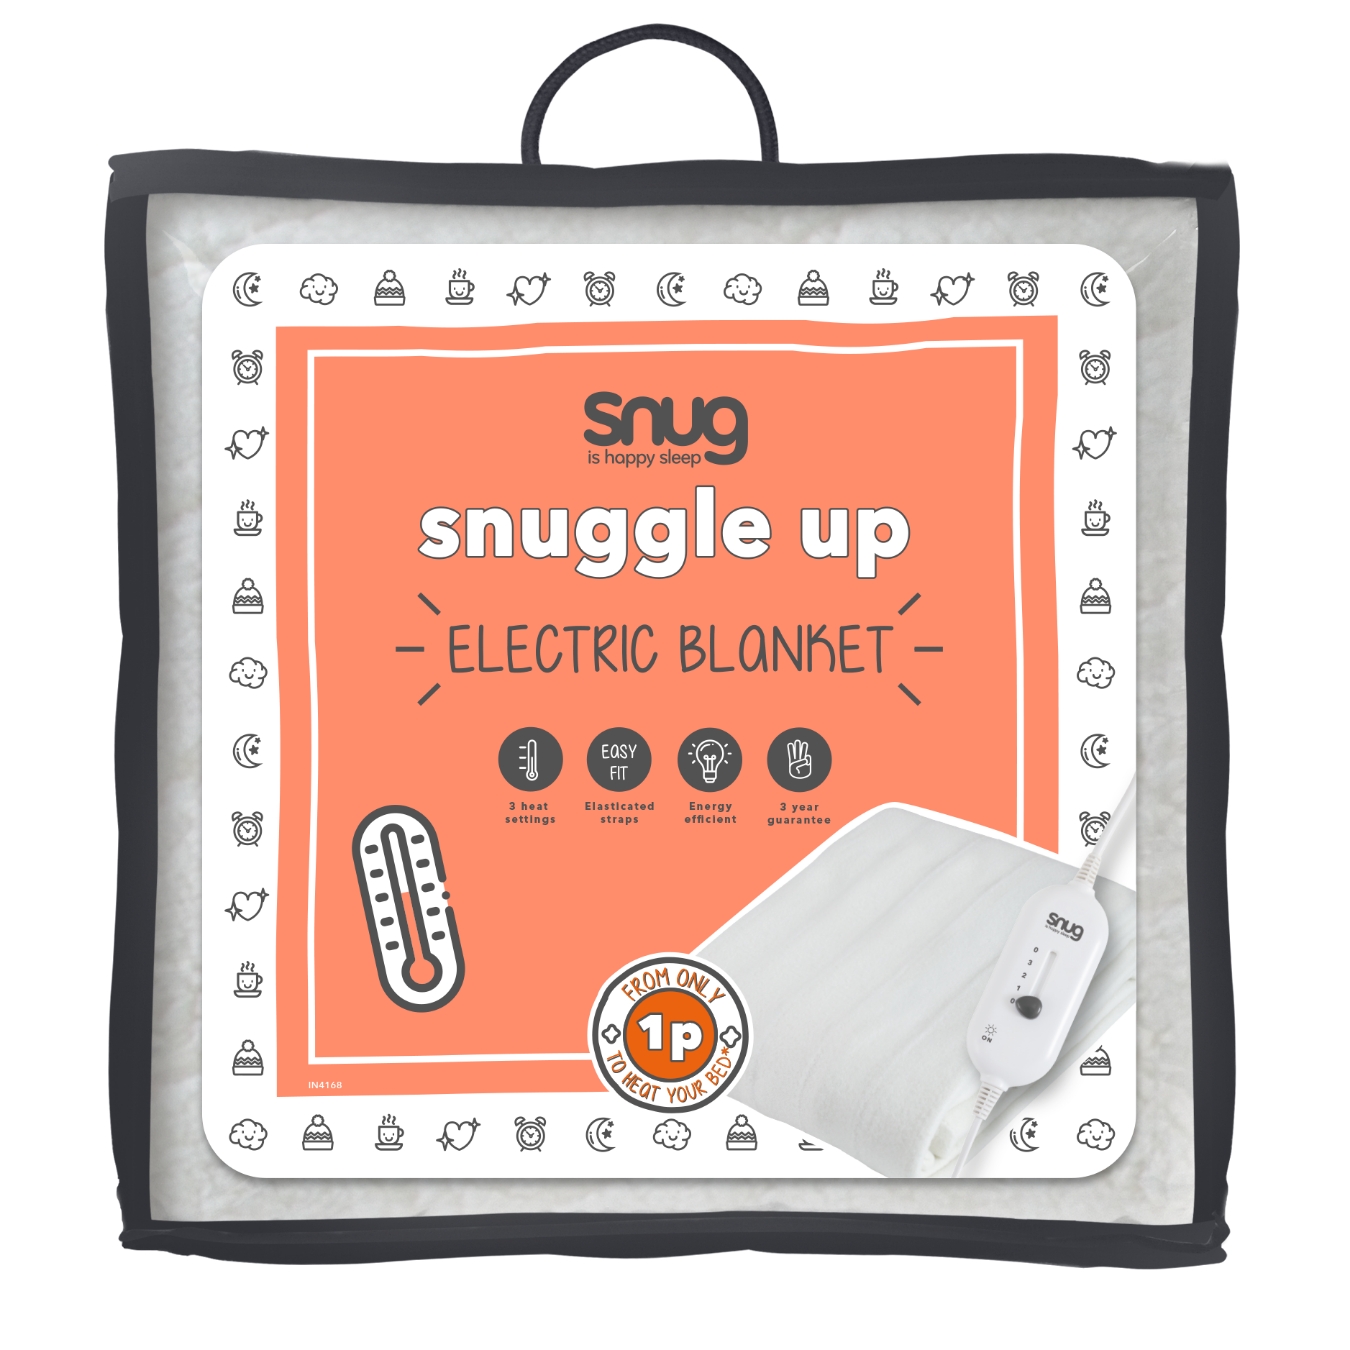 View Snug Snuggle Up Electric Blanket Double information